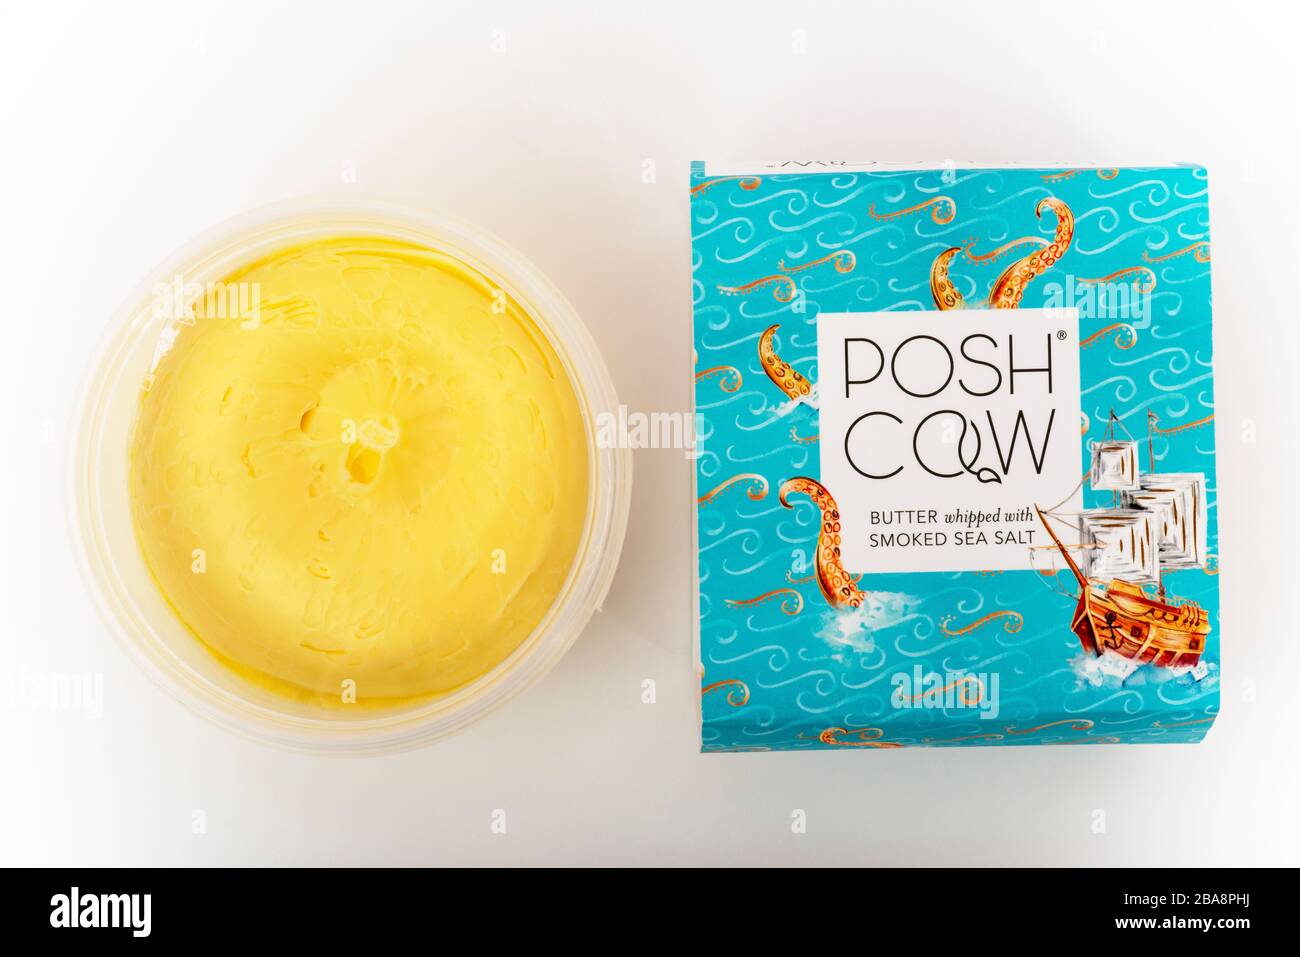 Posh Cow butter Stock Photo